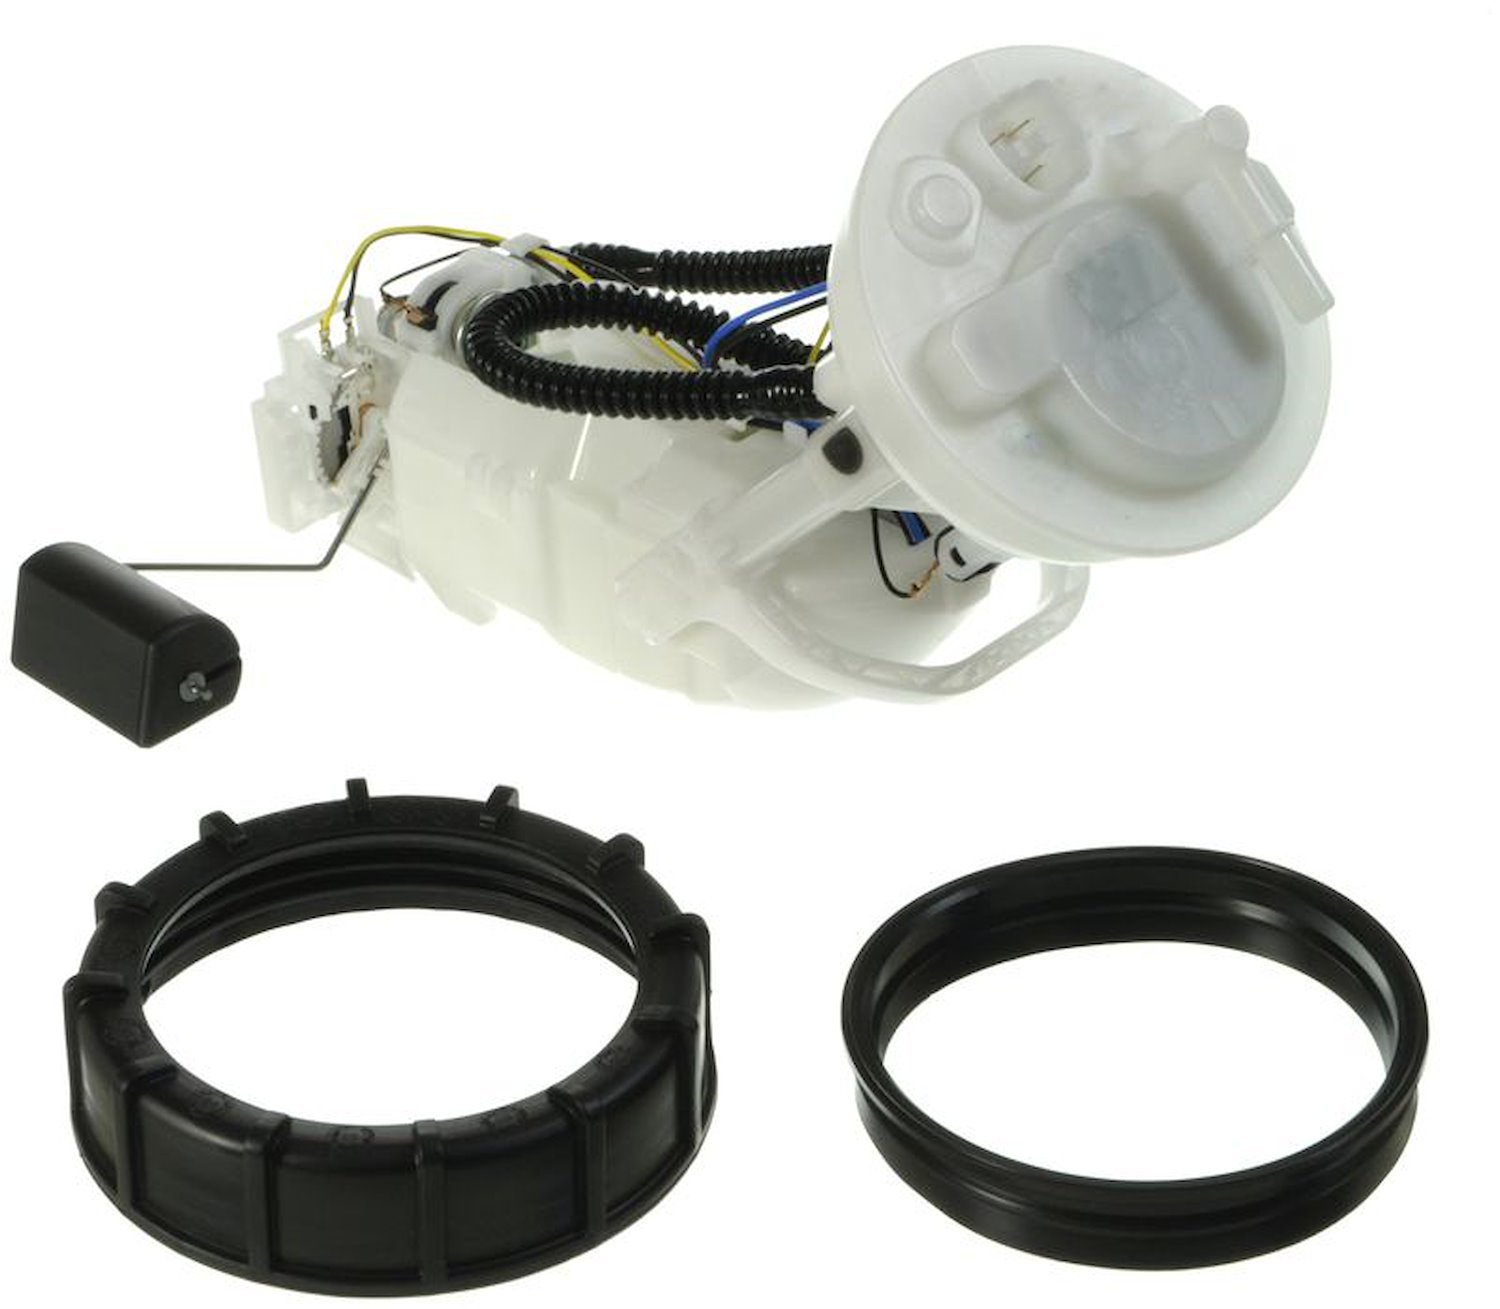 OE Replacement Fuel Pump Module Assembly for 2001-2005 Honda Civic